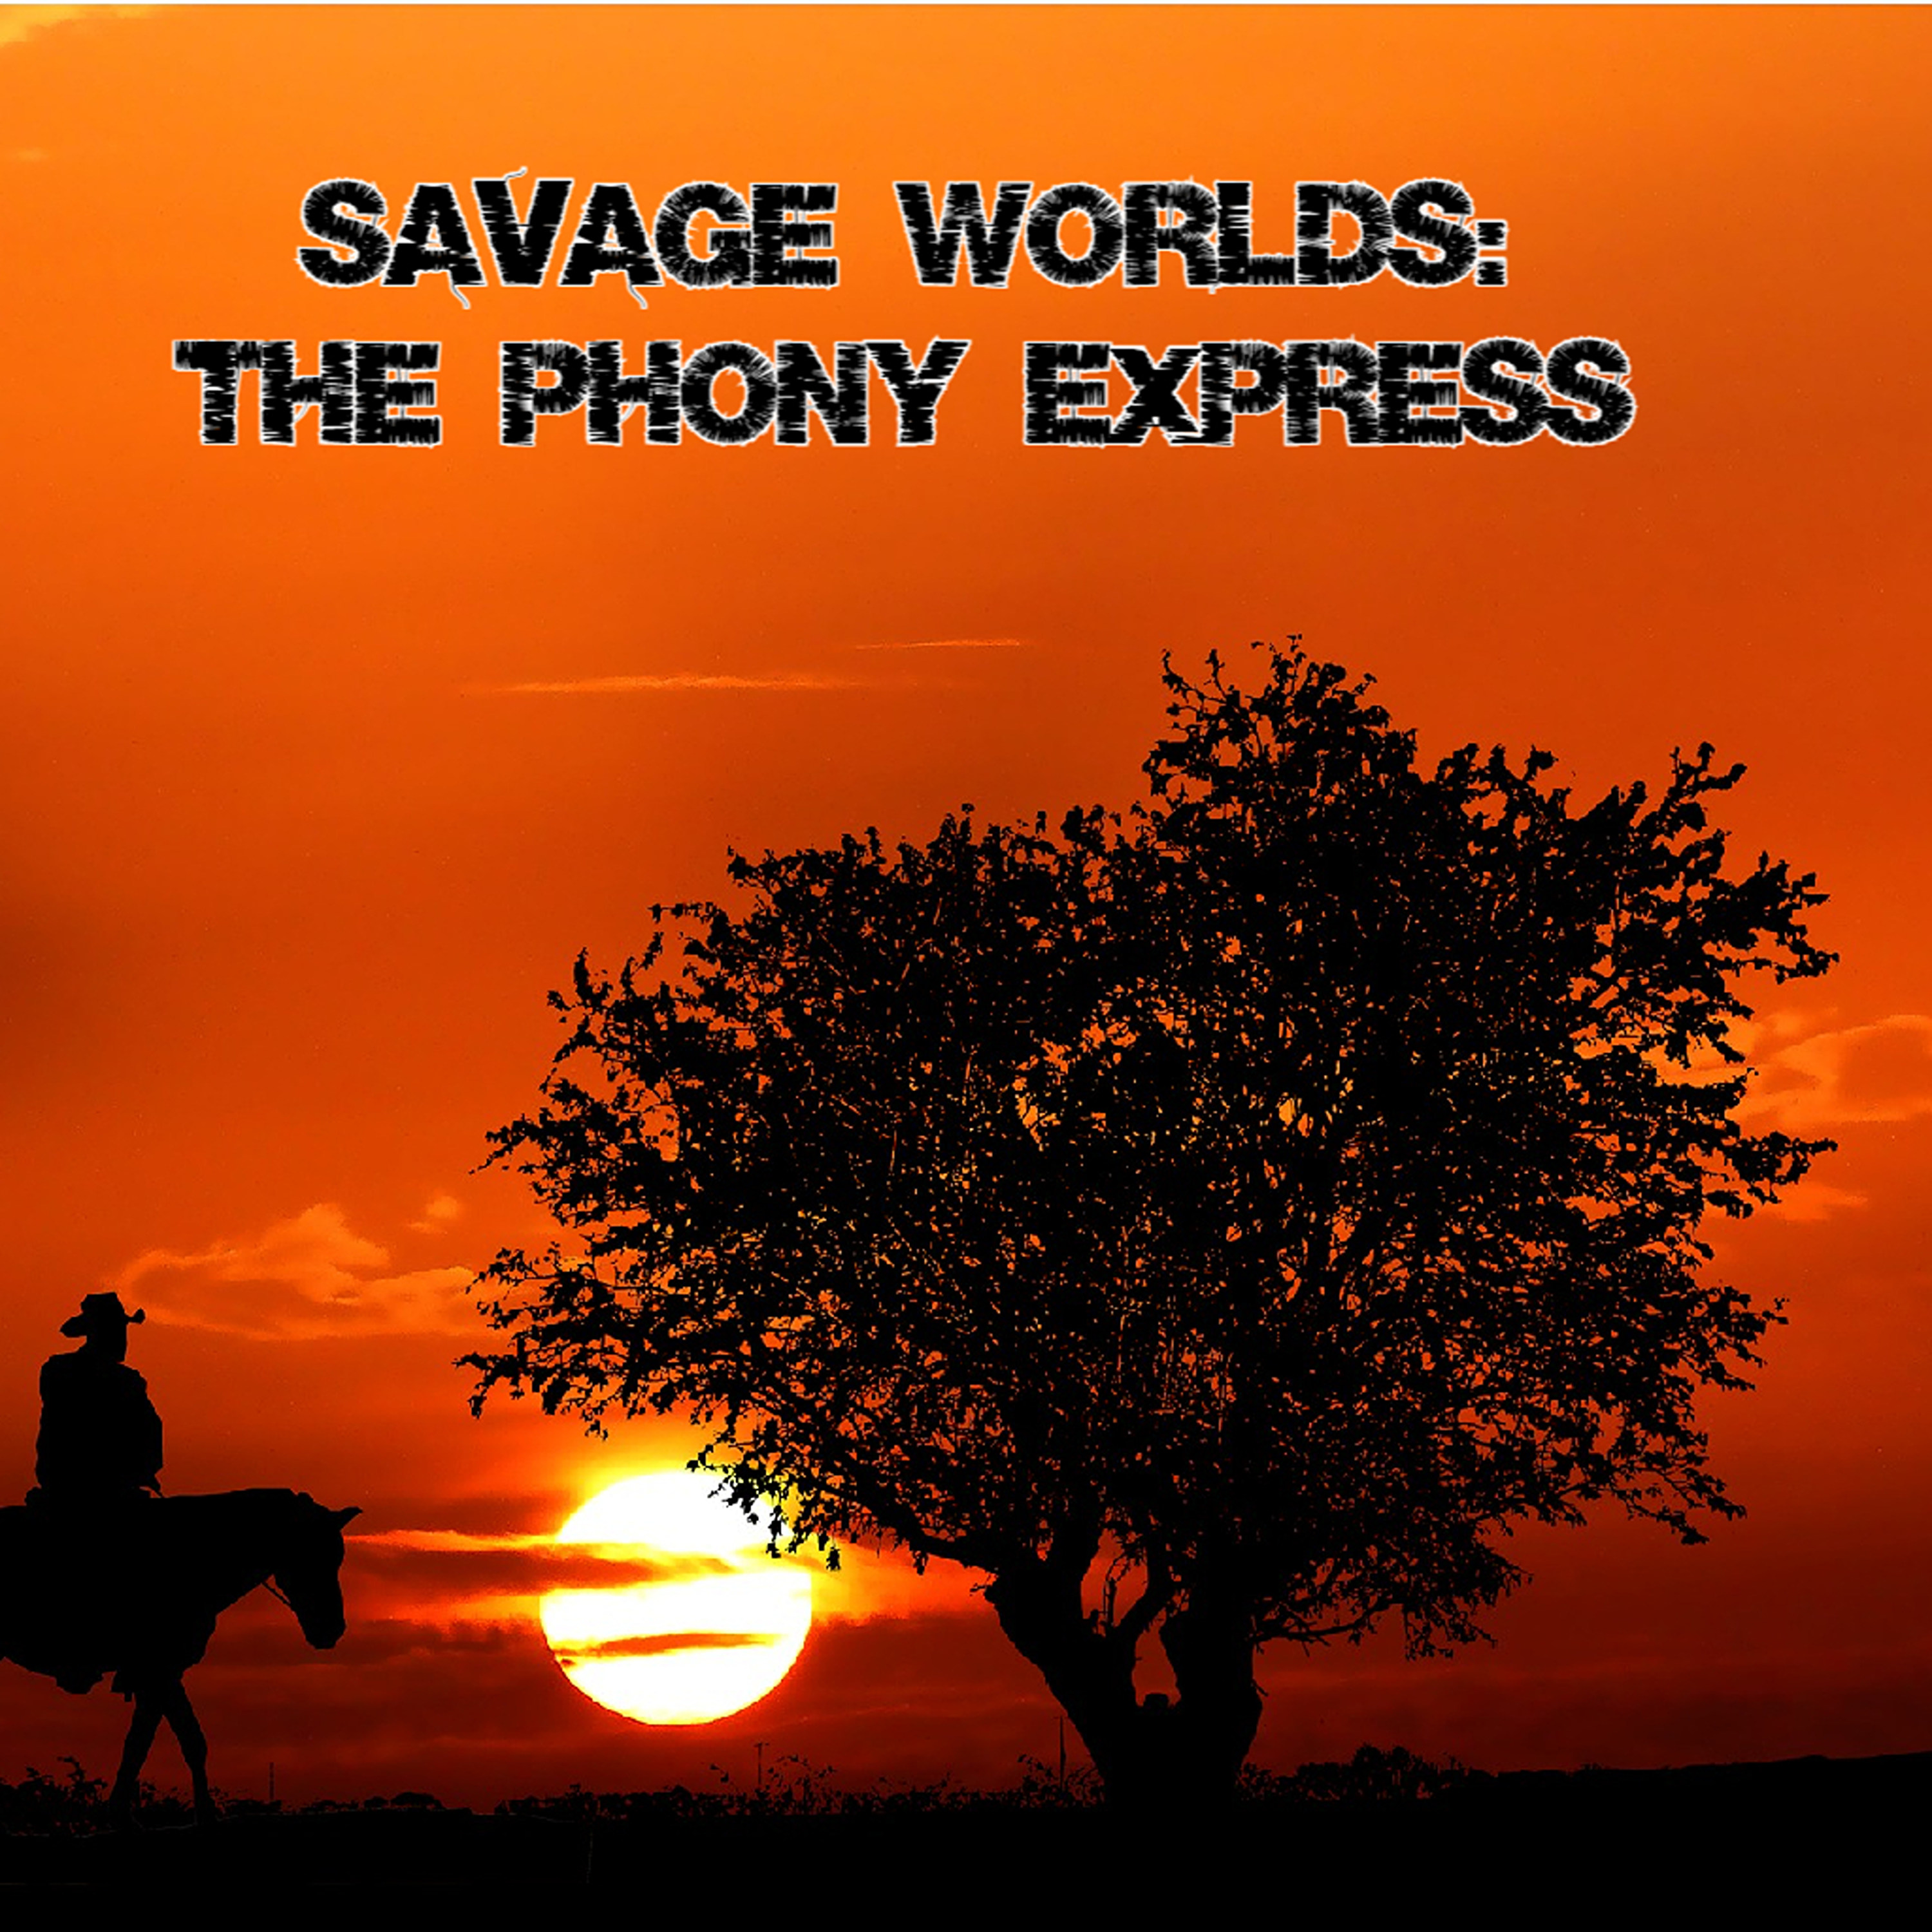 Savage Worlds - The Phony Express 1.7: Booty, Bathy & Beyond